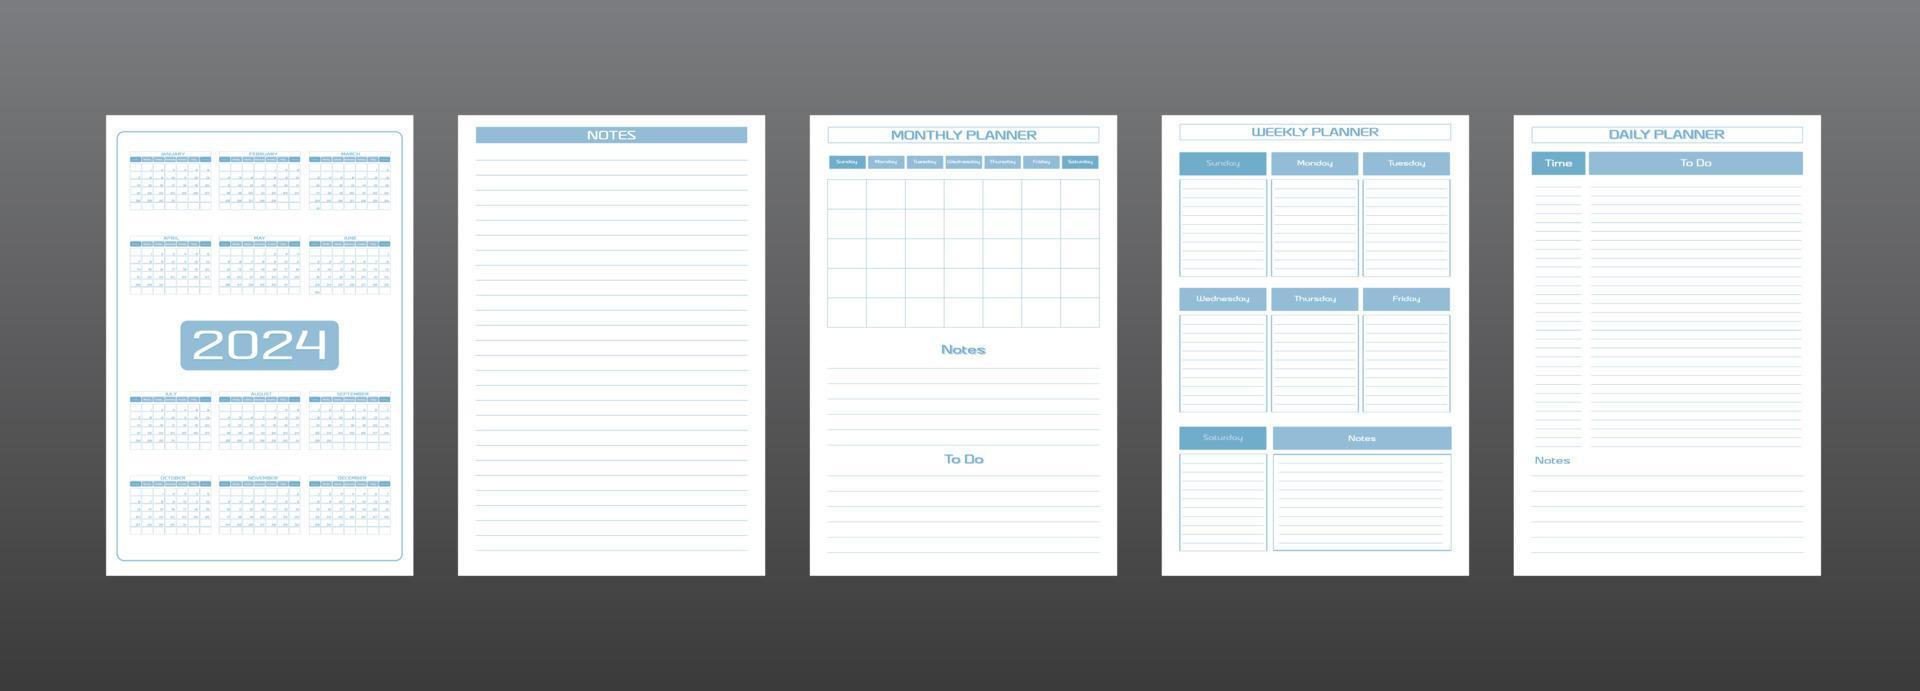 2024-calendar-daily-weekly-monthly-personal-planner-diary-template-in